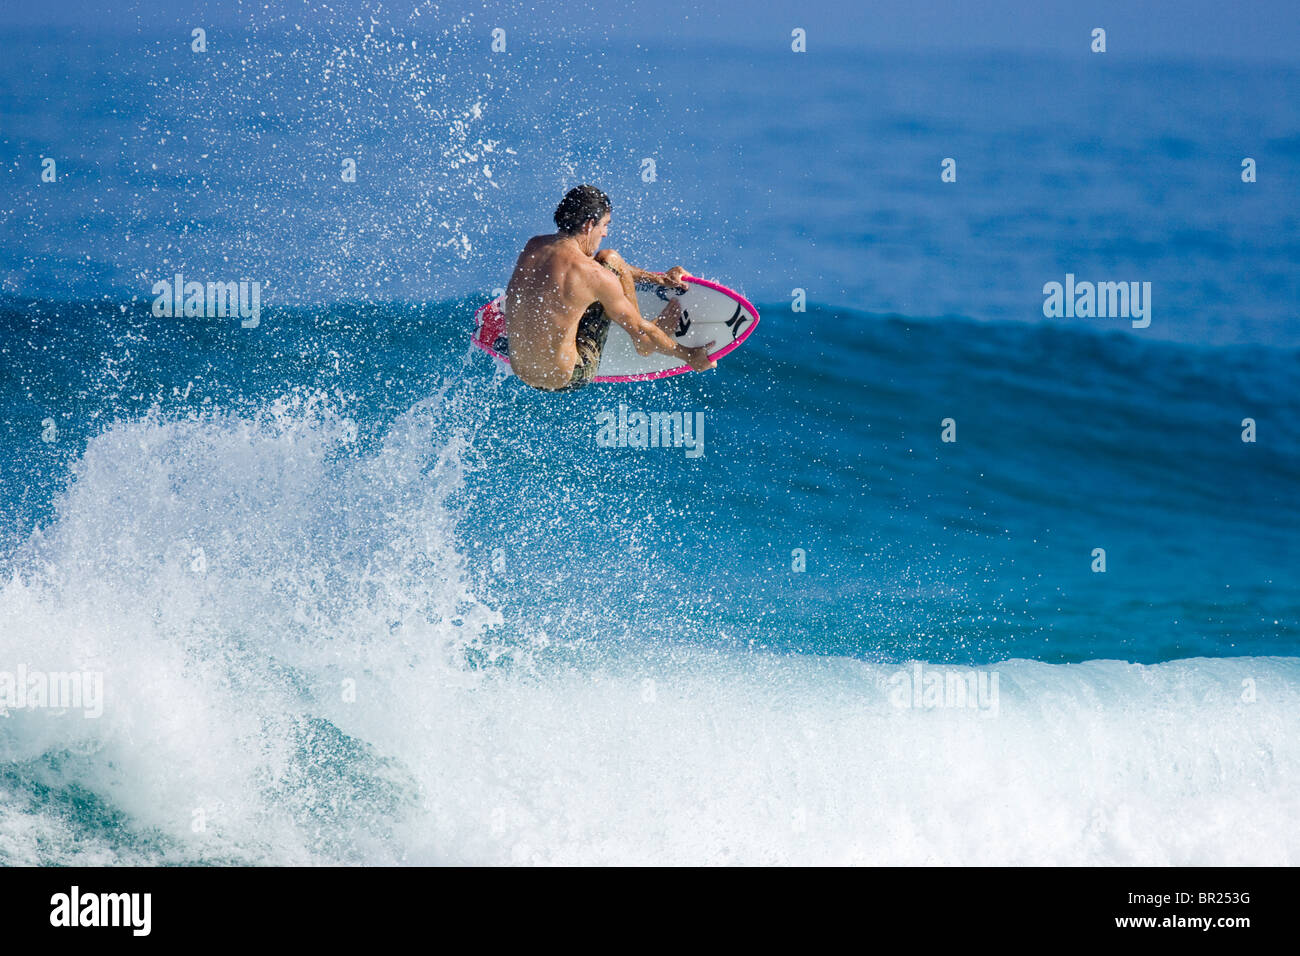 surfer captured during an ariel manouver in Hawaii Stock Photo